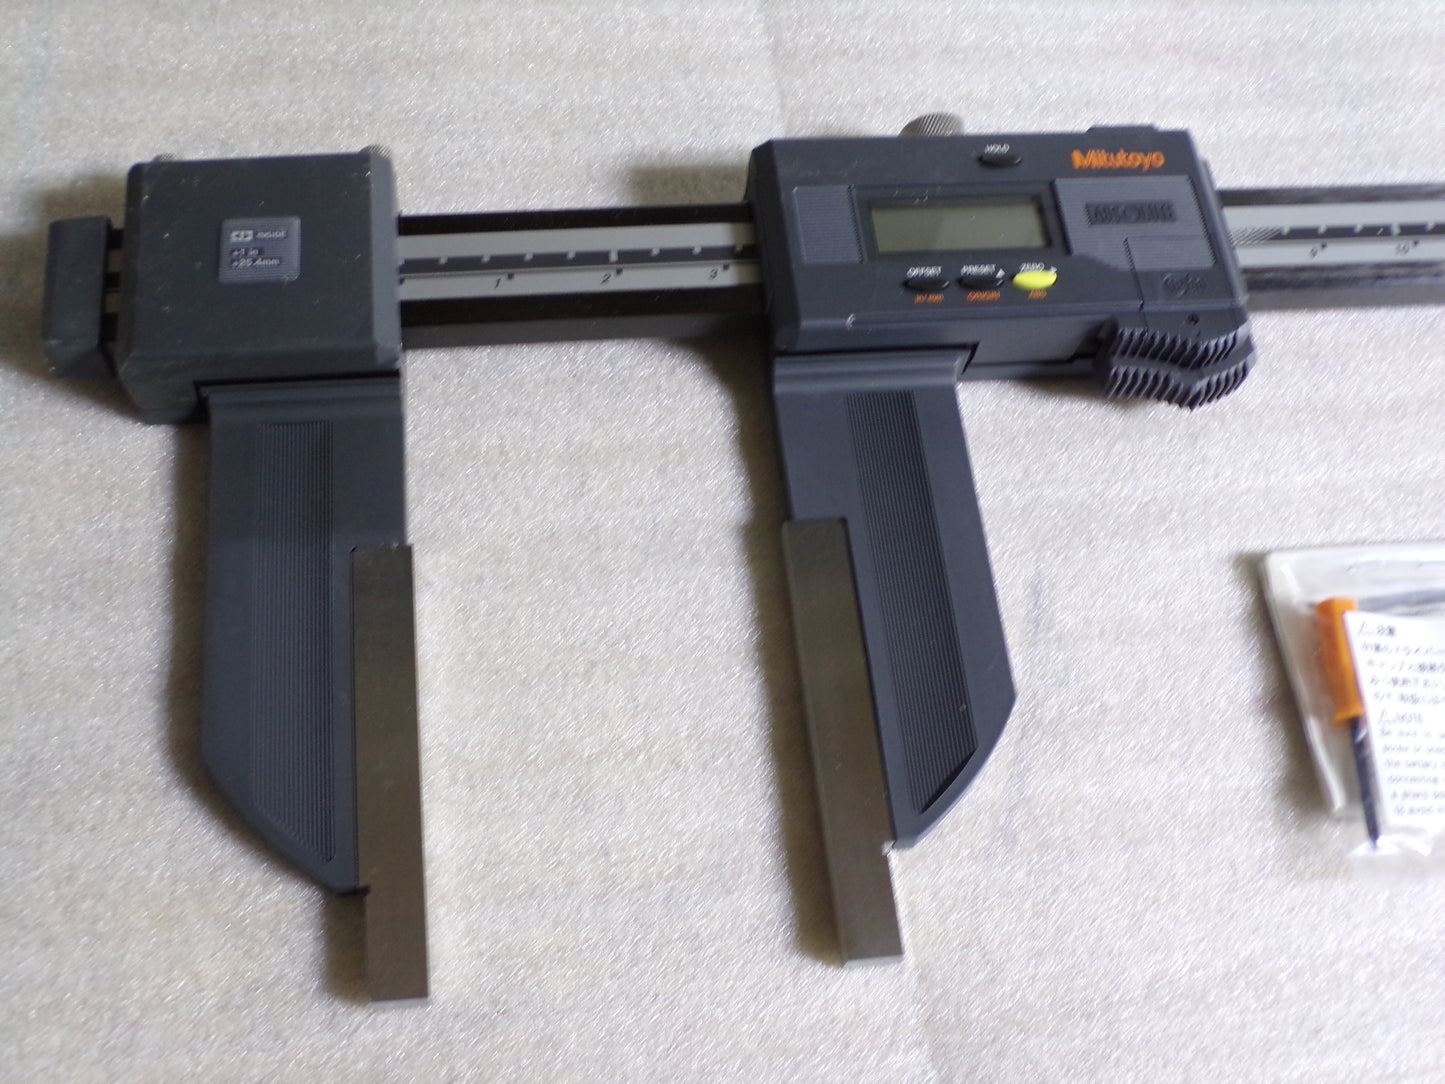 MITUTOYO Long Range Digital Caliper, Range 0 in to 40 in, 0 to 1,000 mm, IP Rating IP66, SPC Output Yes, Mfr. Model # 552-314-10 (CR00549-X02)